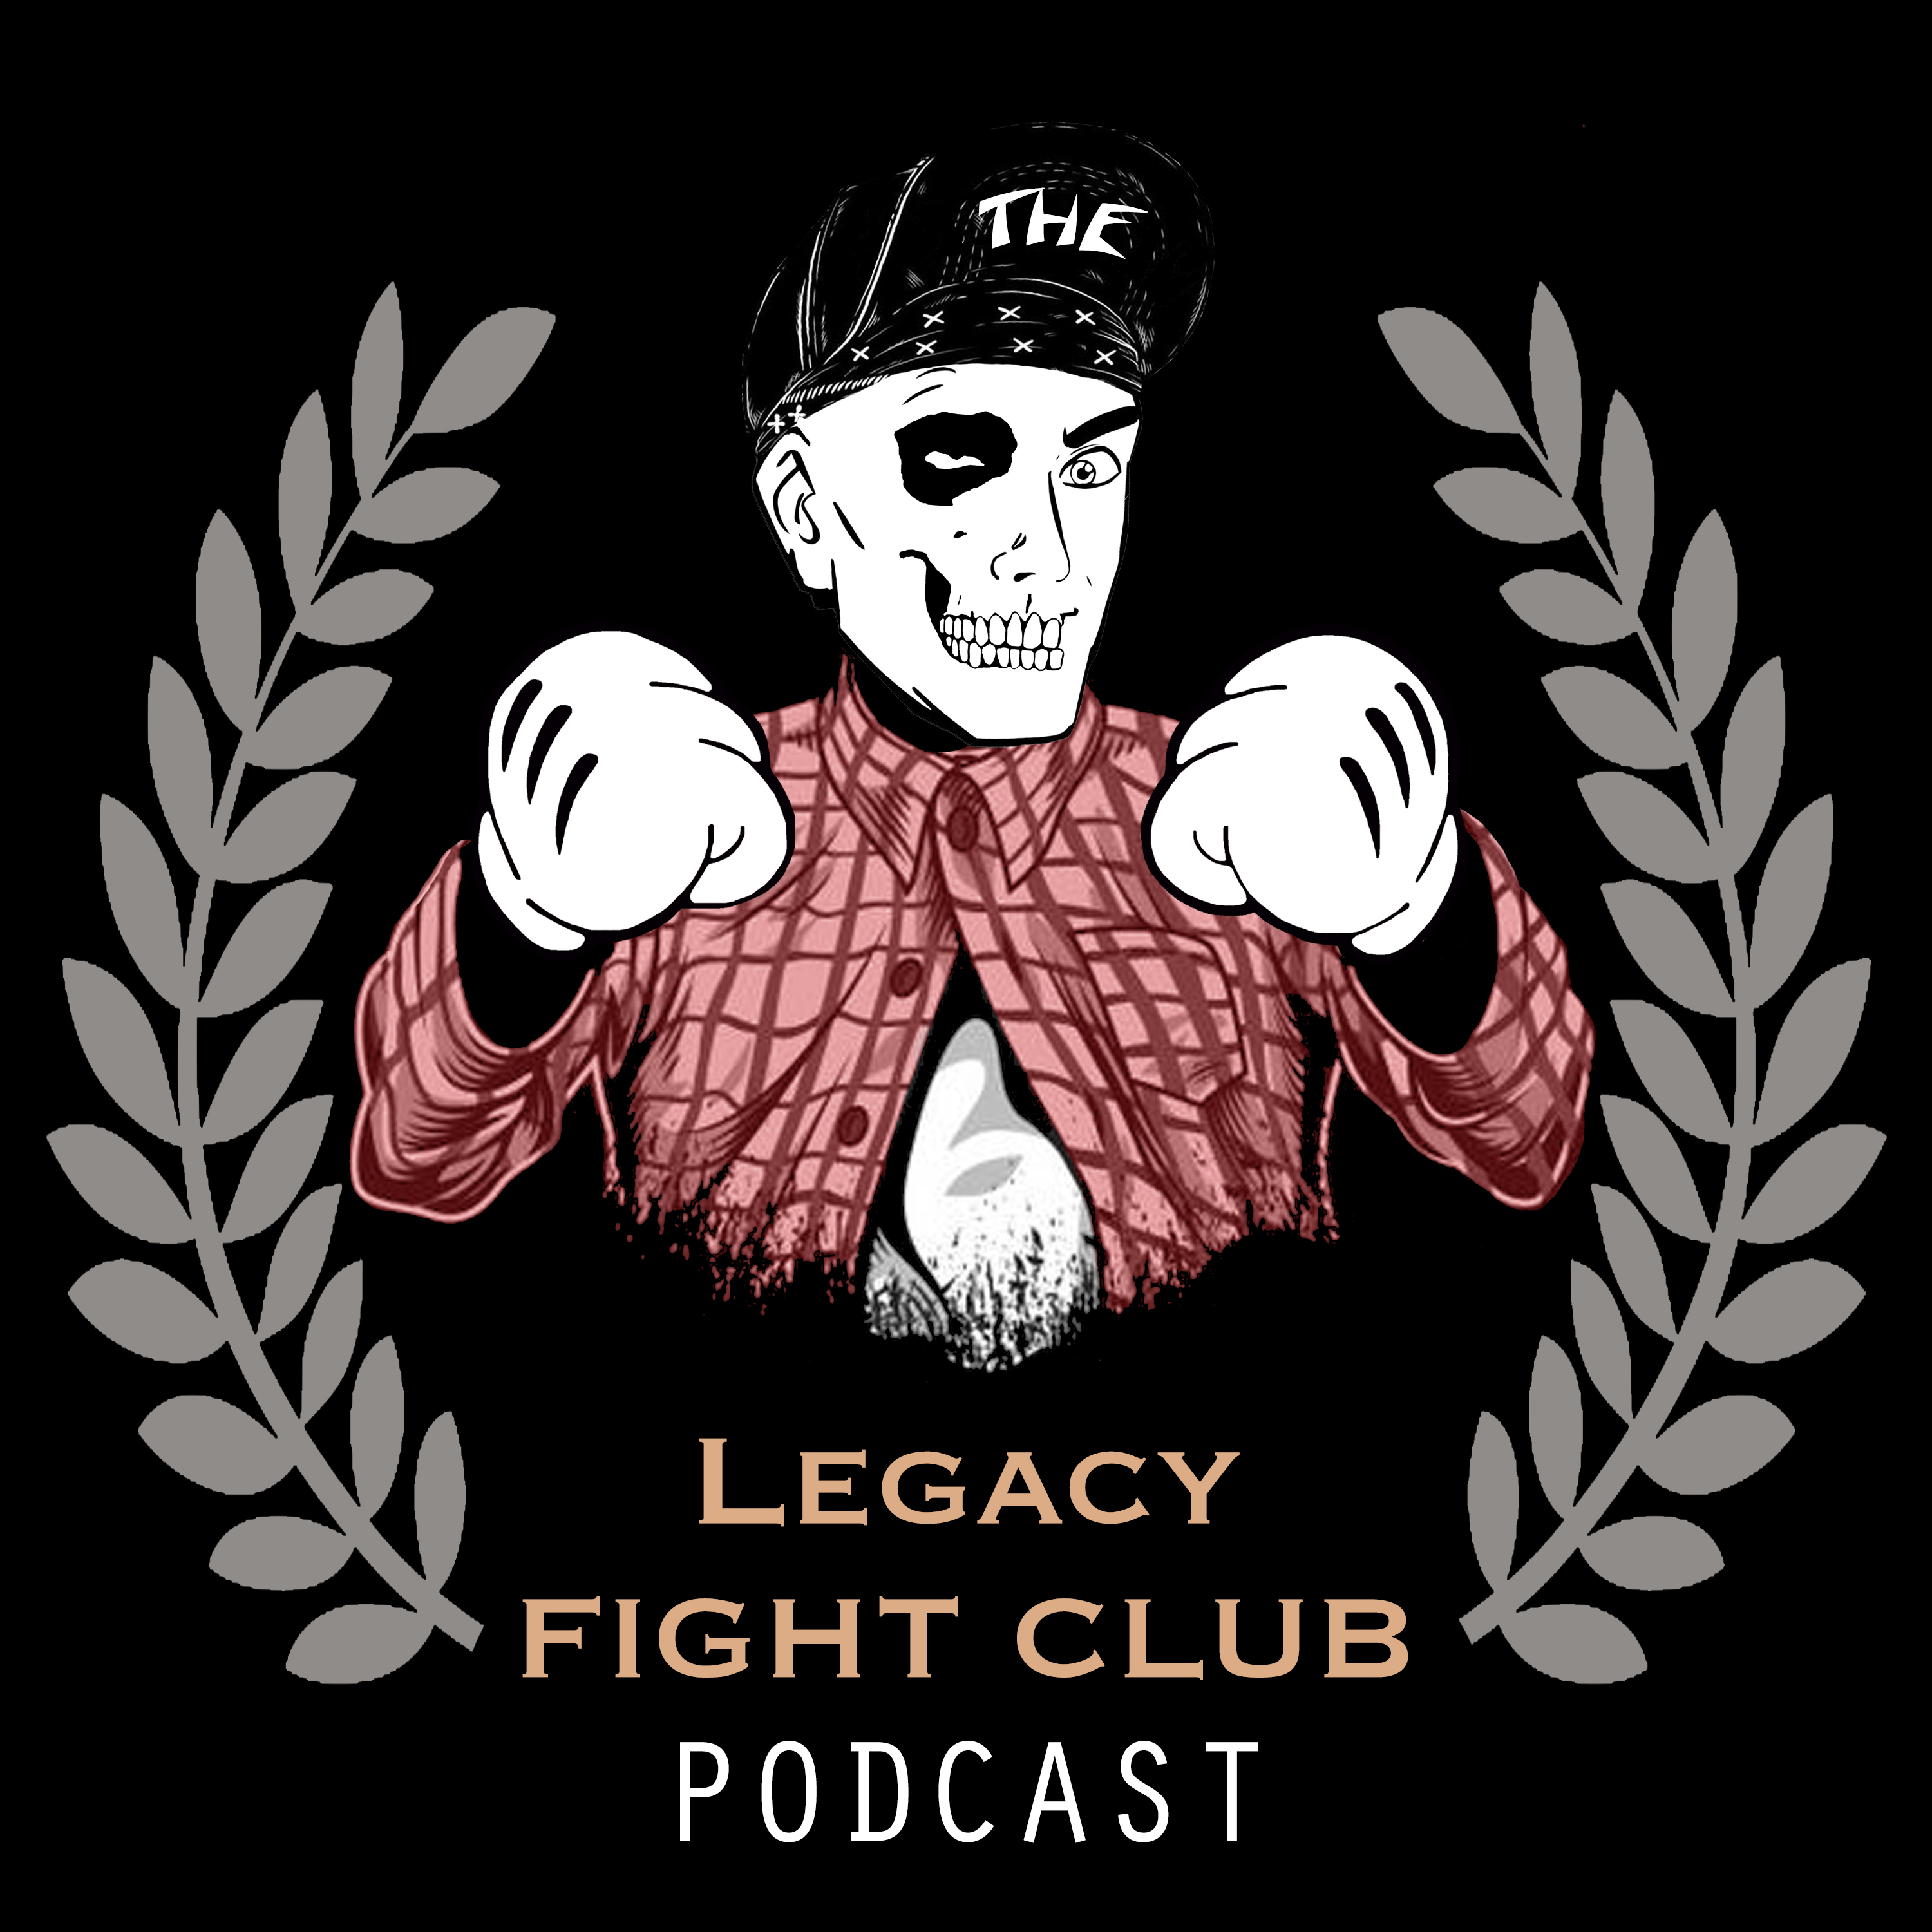 The Legacy Fight Club